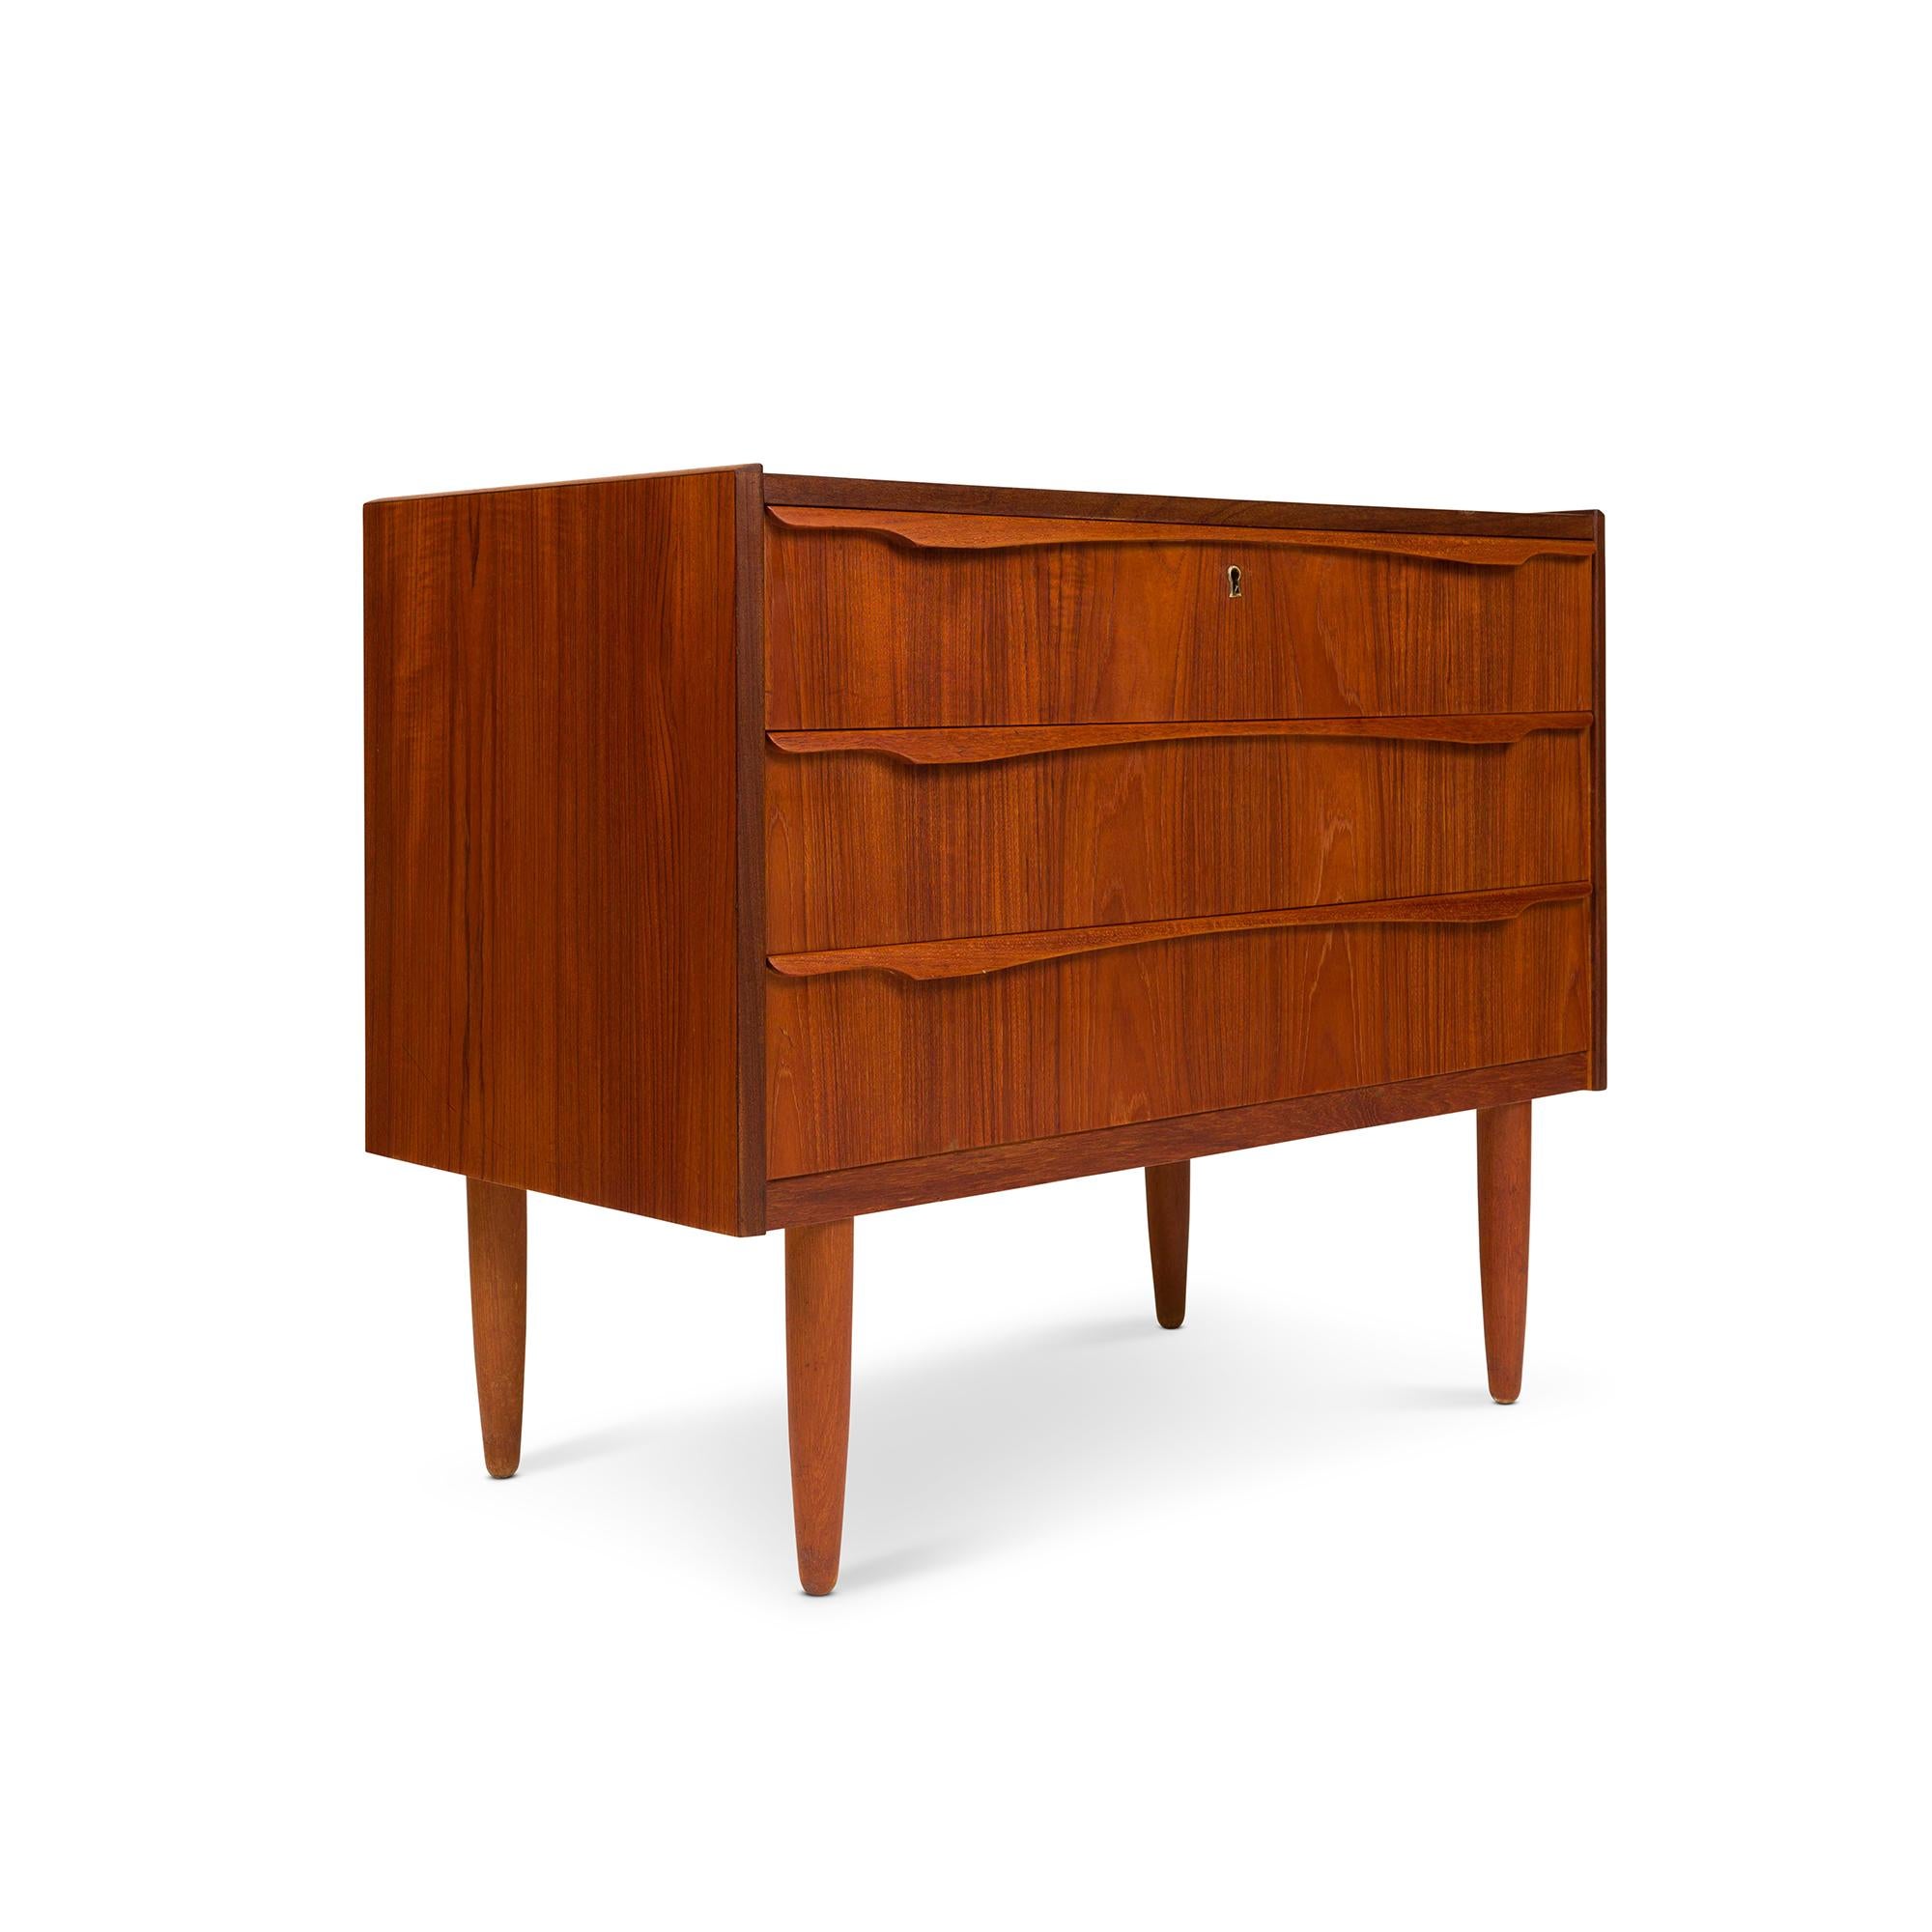 Exuding timeless elegance, this vintage Danish mid-century modern lowboy dresser boasts exquisite teak wood grain that captivates the eye. Its allure lies in the three impeccably crafted drawers adorned with intricately carved drawer pulls, all in